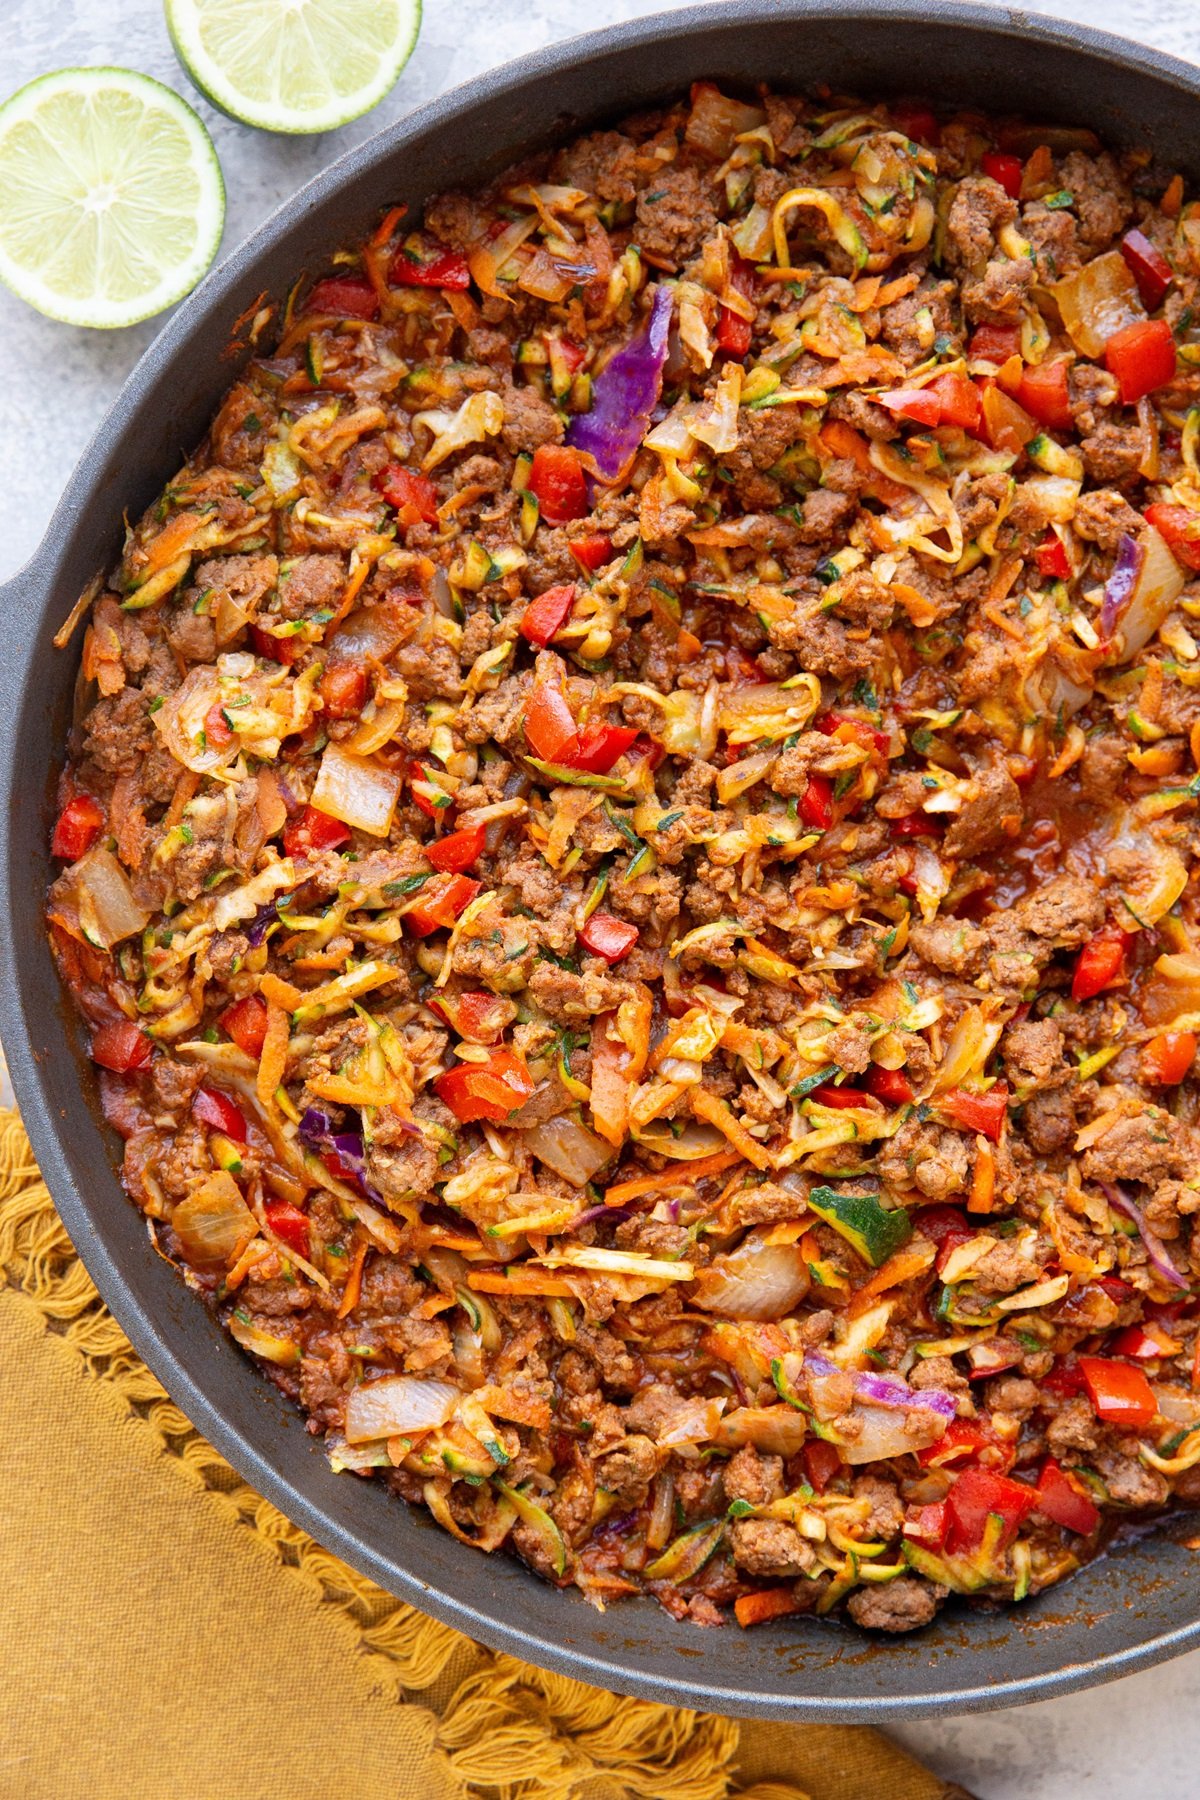 Large skillet with ground beef, vegetables and Mexican-inspired flavors for a high protein low-carb meal.